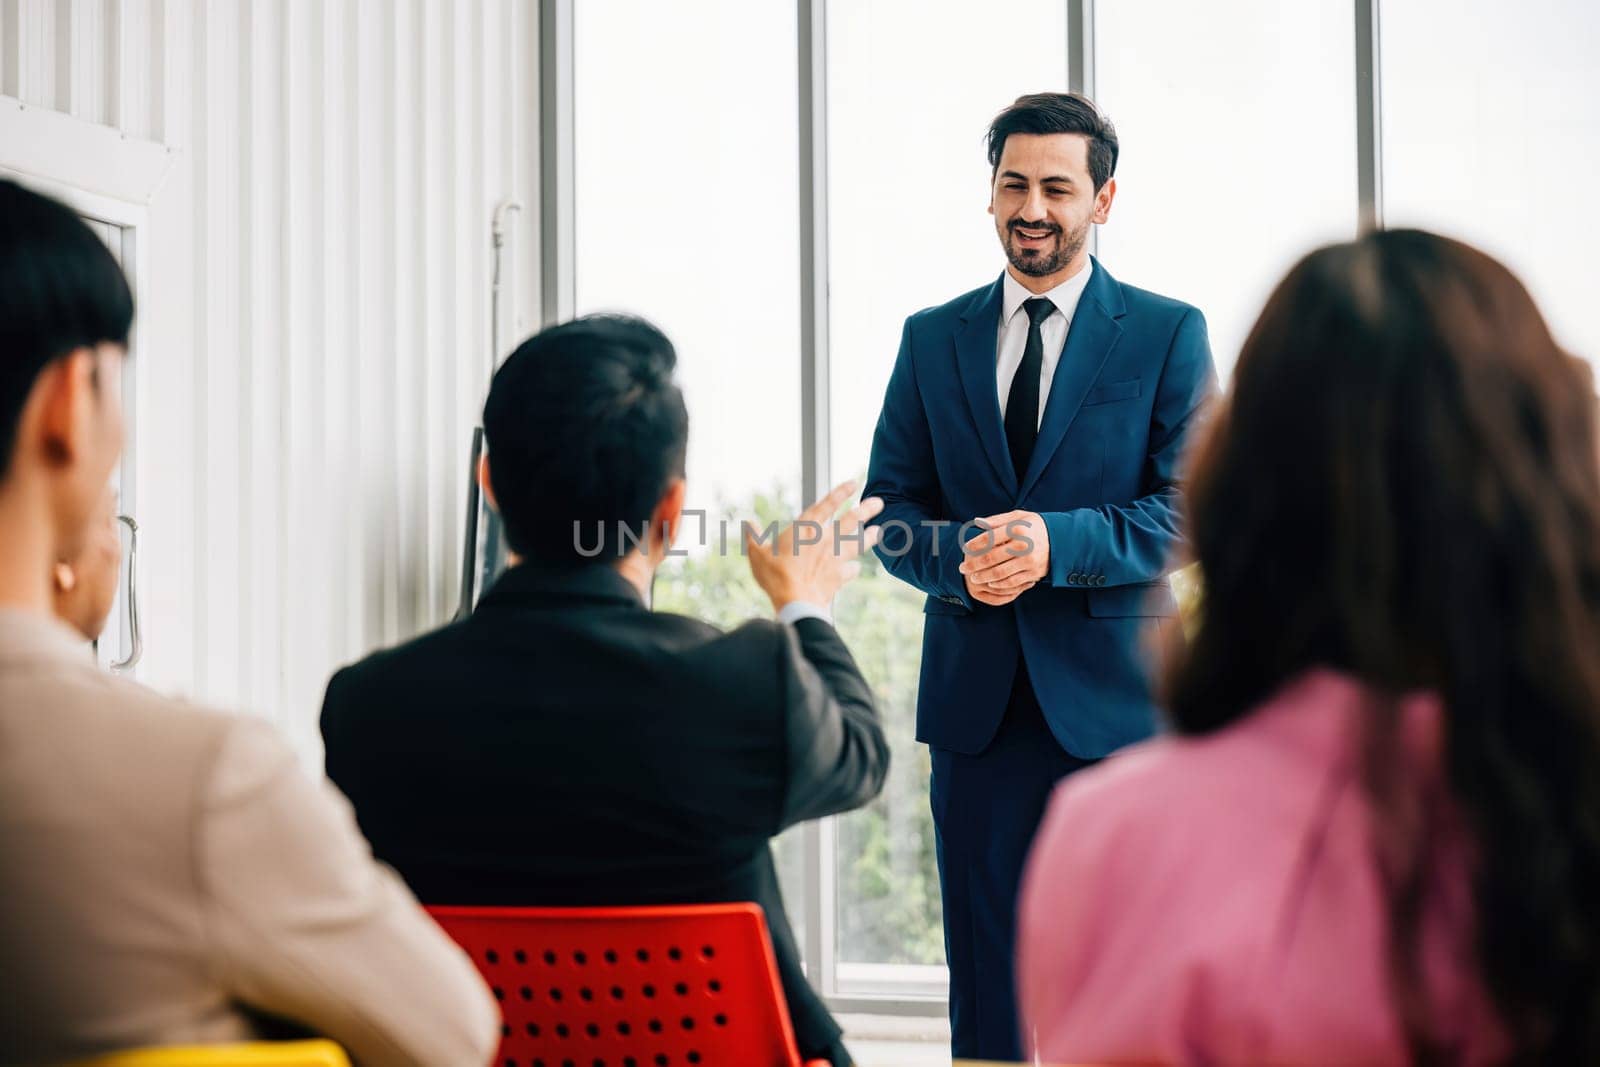 In a meeting room, business leaders present their insights, while a diverse audience of colleagues attentively listens. This image signifies the success of teamwork and collaborative discussions. by Sorapop